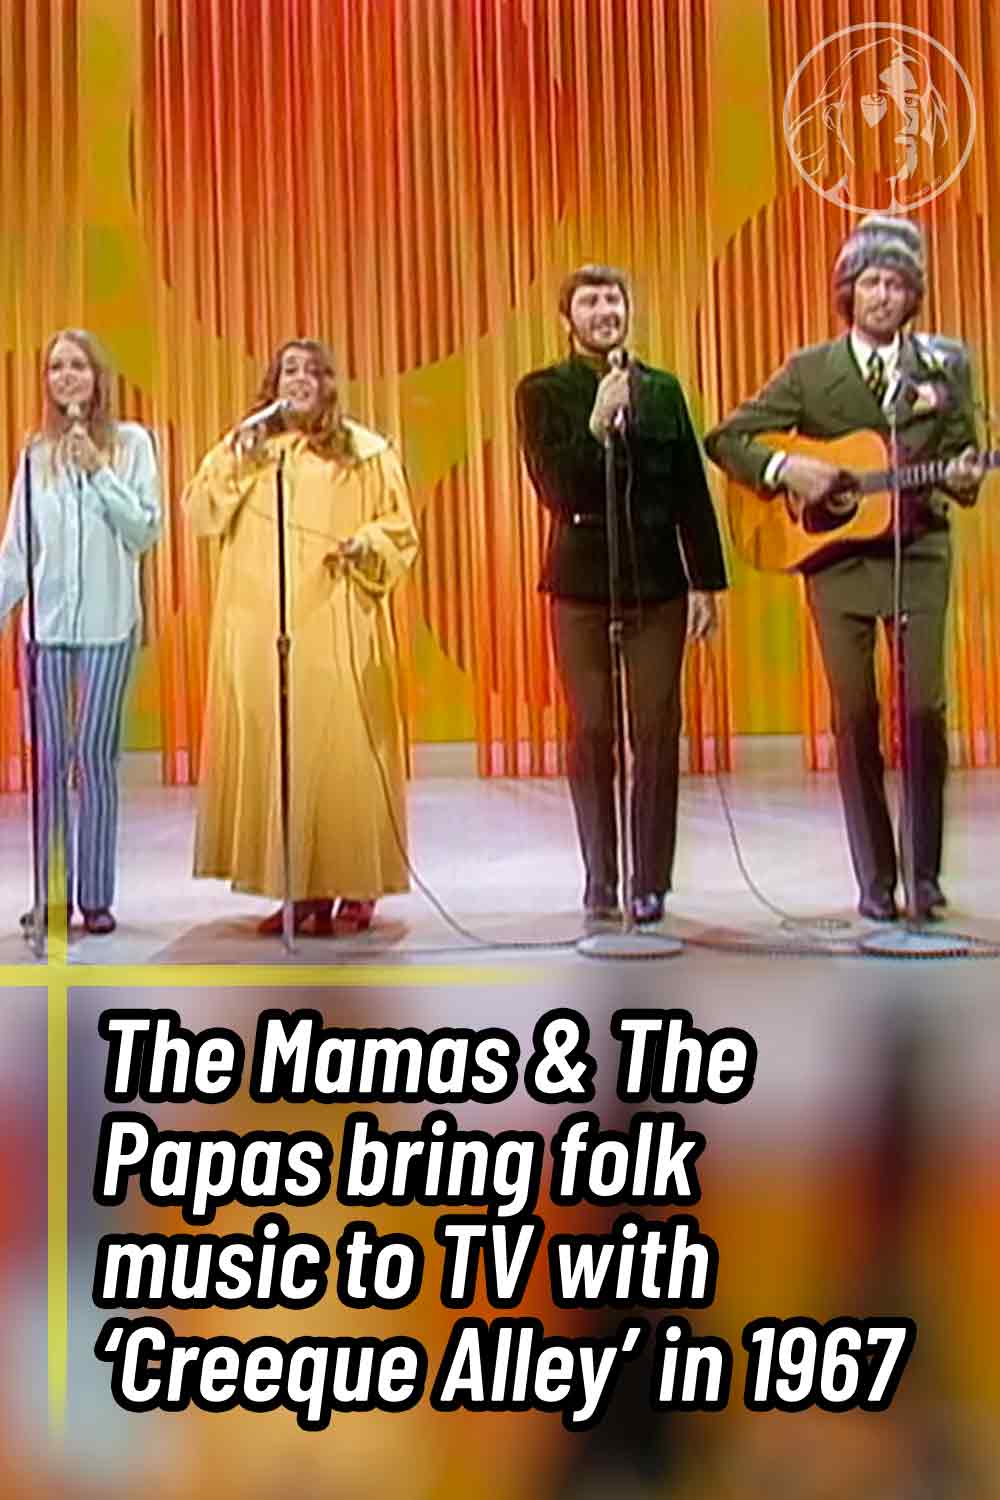 The Mamas & The Papas bring folk music to TV with ‘Creeque Alley’ in 1967